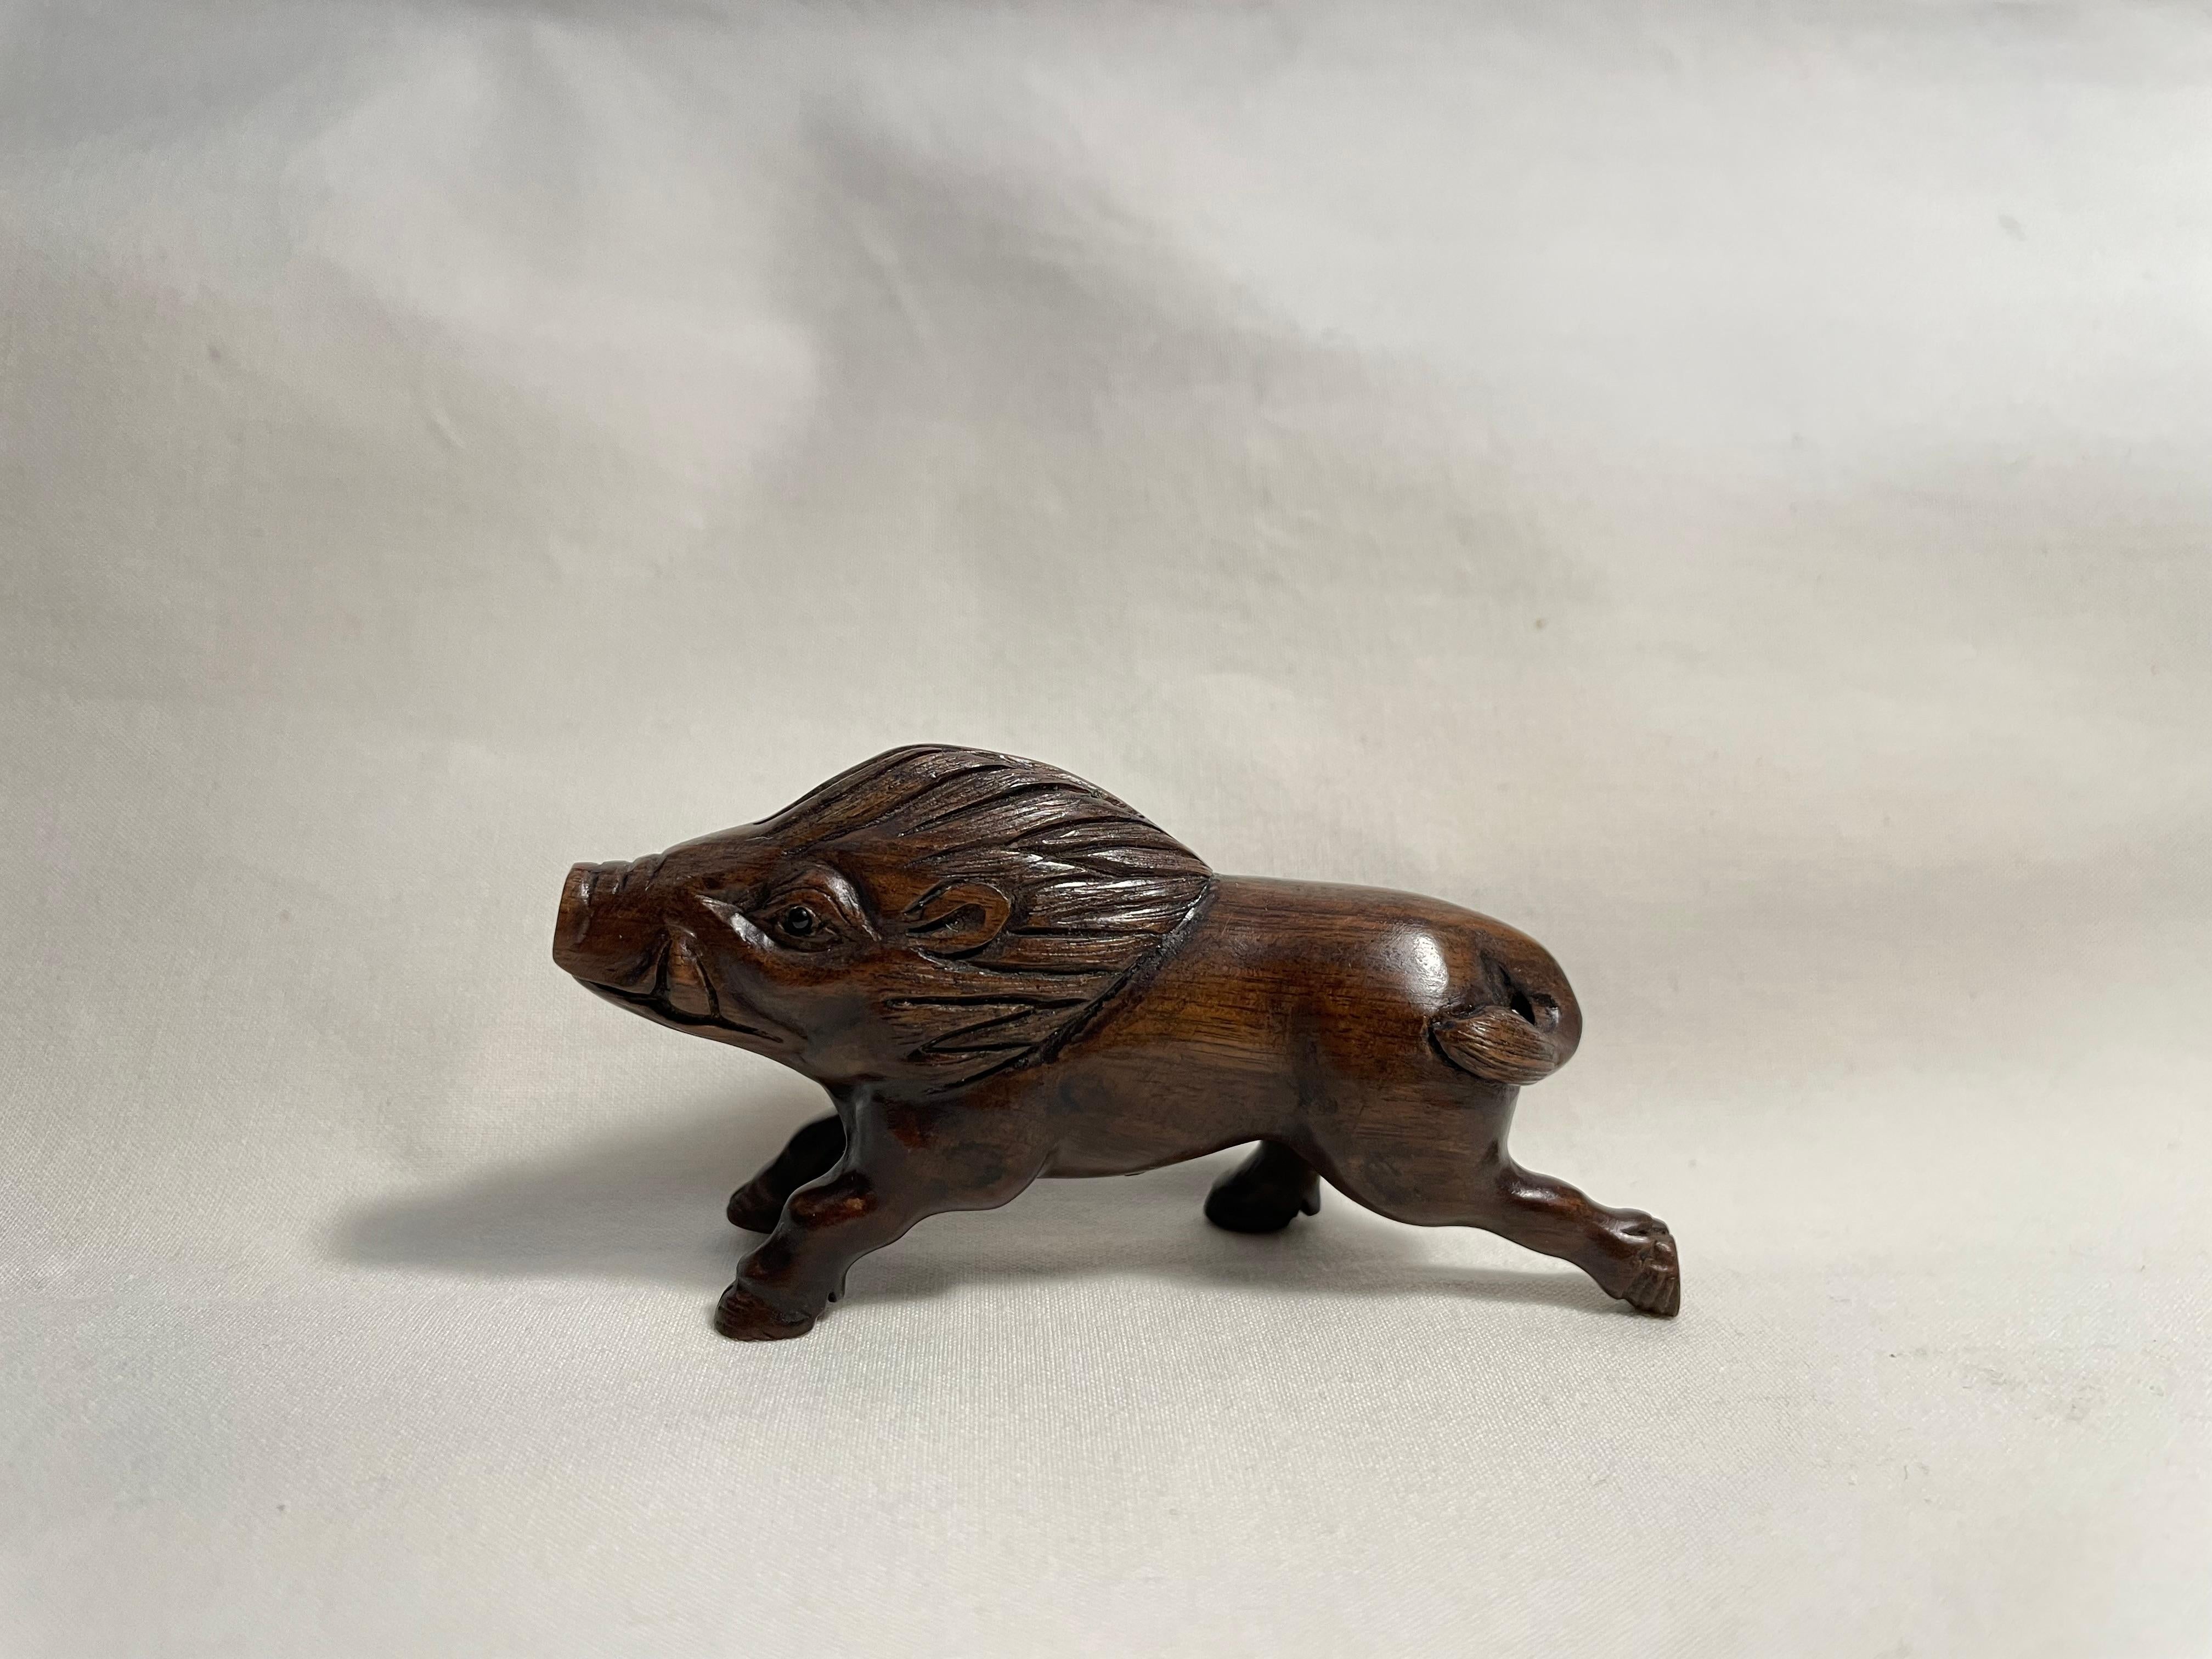 This is an antique netsuke made in Japan around Showa period 1960s.

Dimensions: 2.5 x 6.8 x H3.7 cm
Sculpture: Wild Boar
Era: 1960s (Showa) 

Netsuke is a miniature sculpture, originating in 17th century Japan.
Initially a simply-carved button